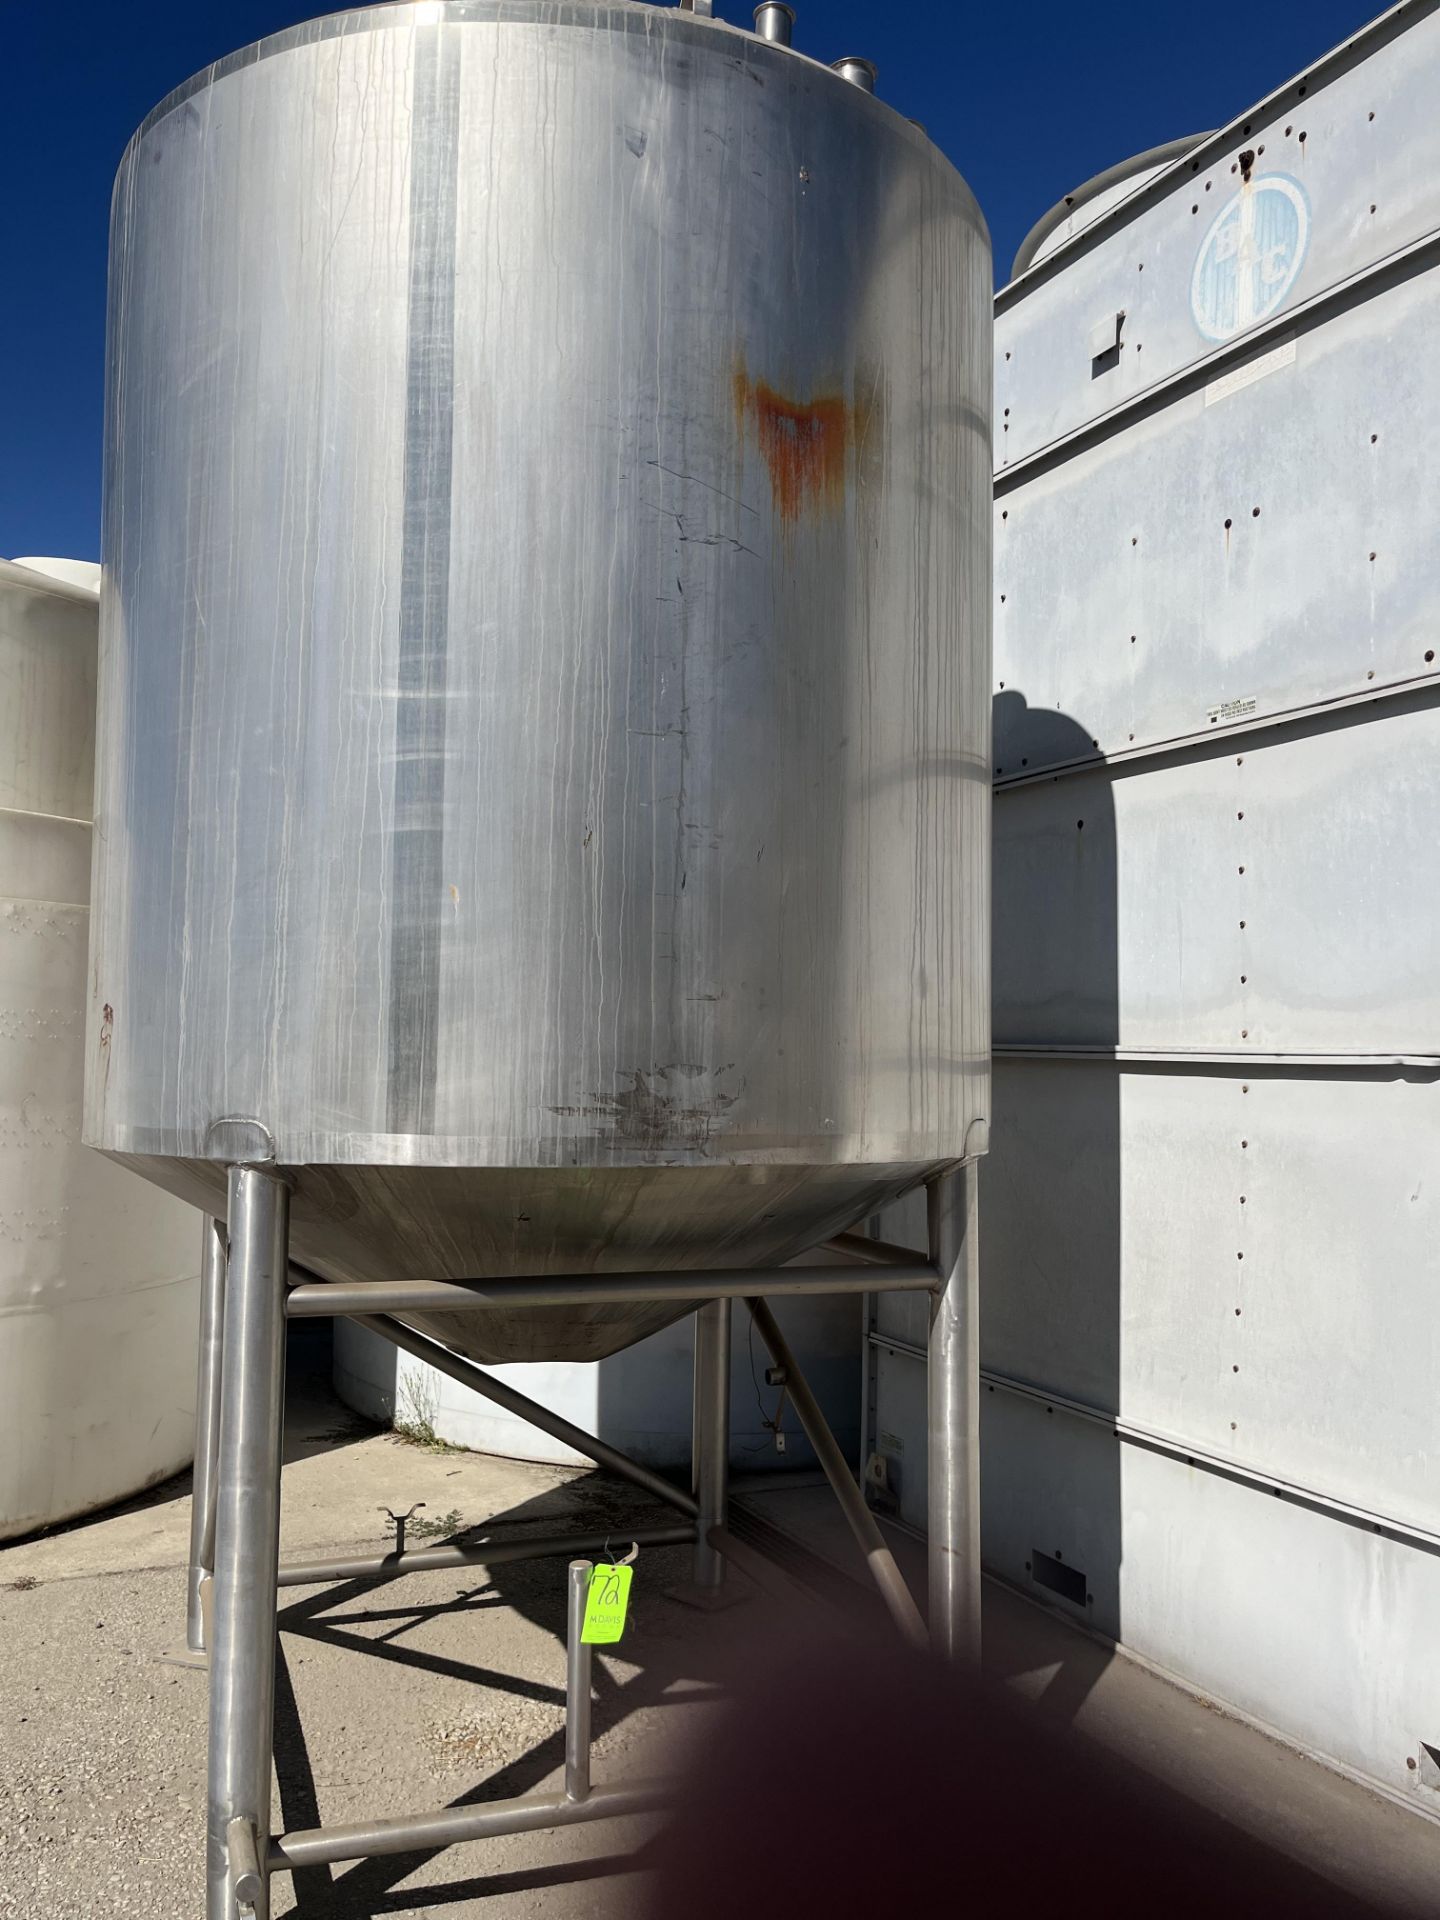 Sani-Fab Jacketed S/S Tank, Tank Dims.: Aprox. 7 ft. Tall x 80” Dia., Cone Bottom, Mounted on S/S - Image 5 of 9